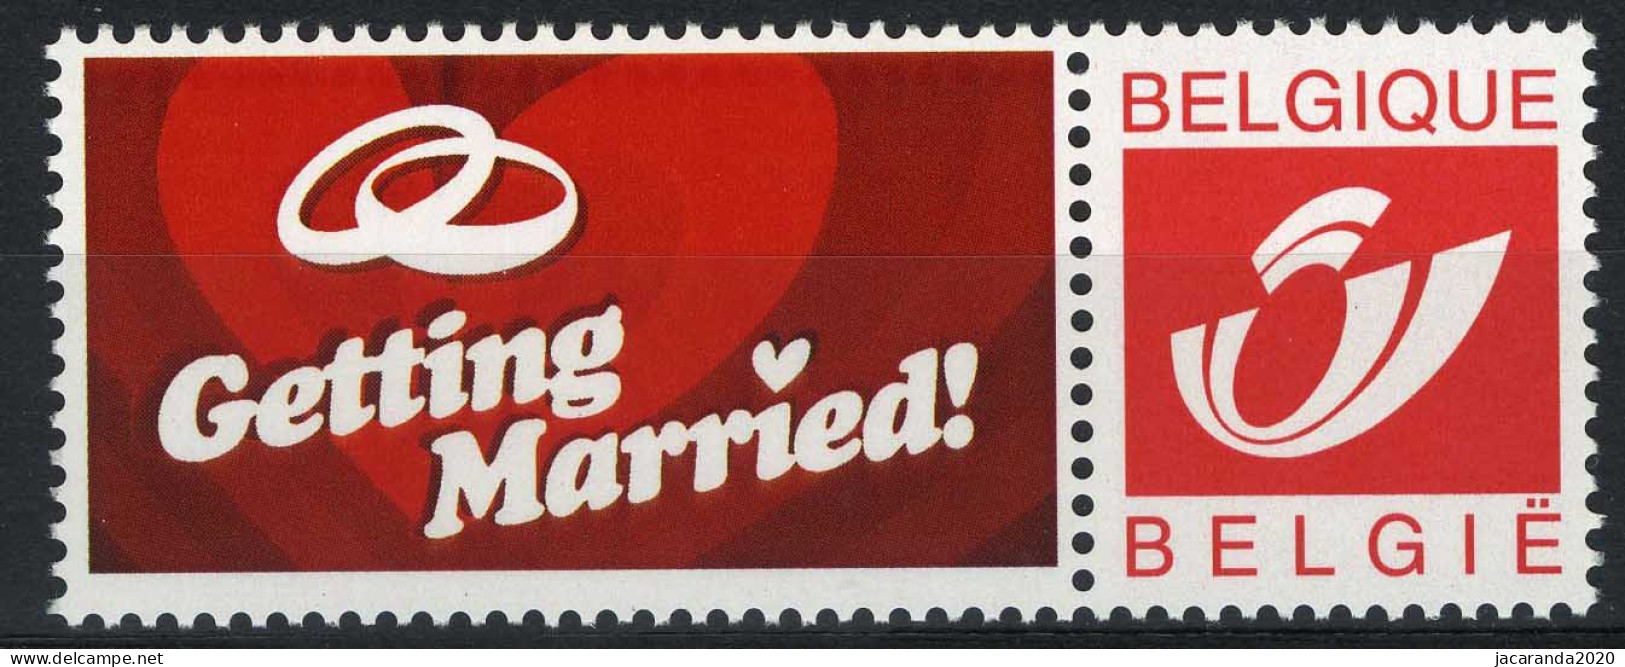 België 3181 - Duostamp - Getting Married - Mint